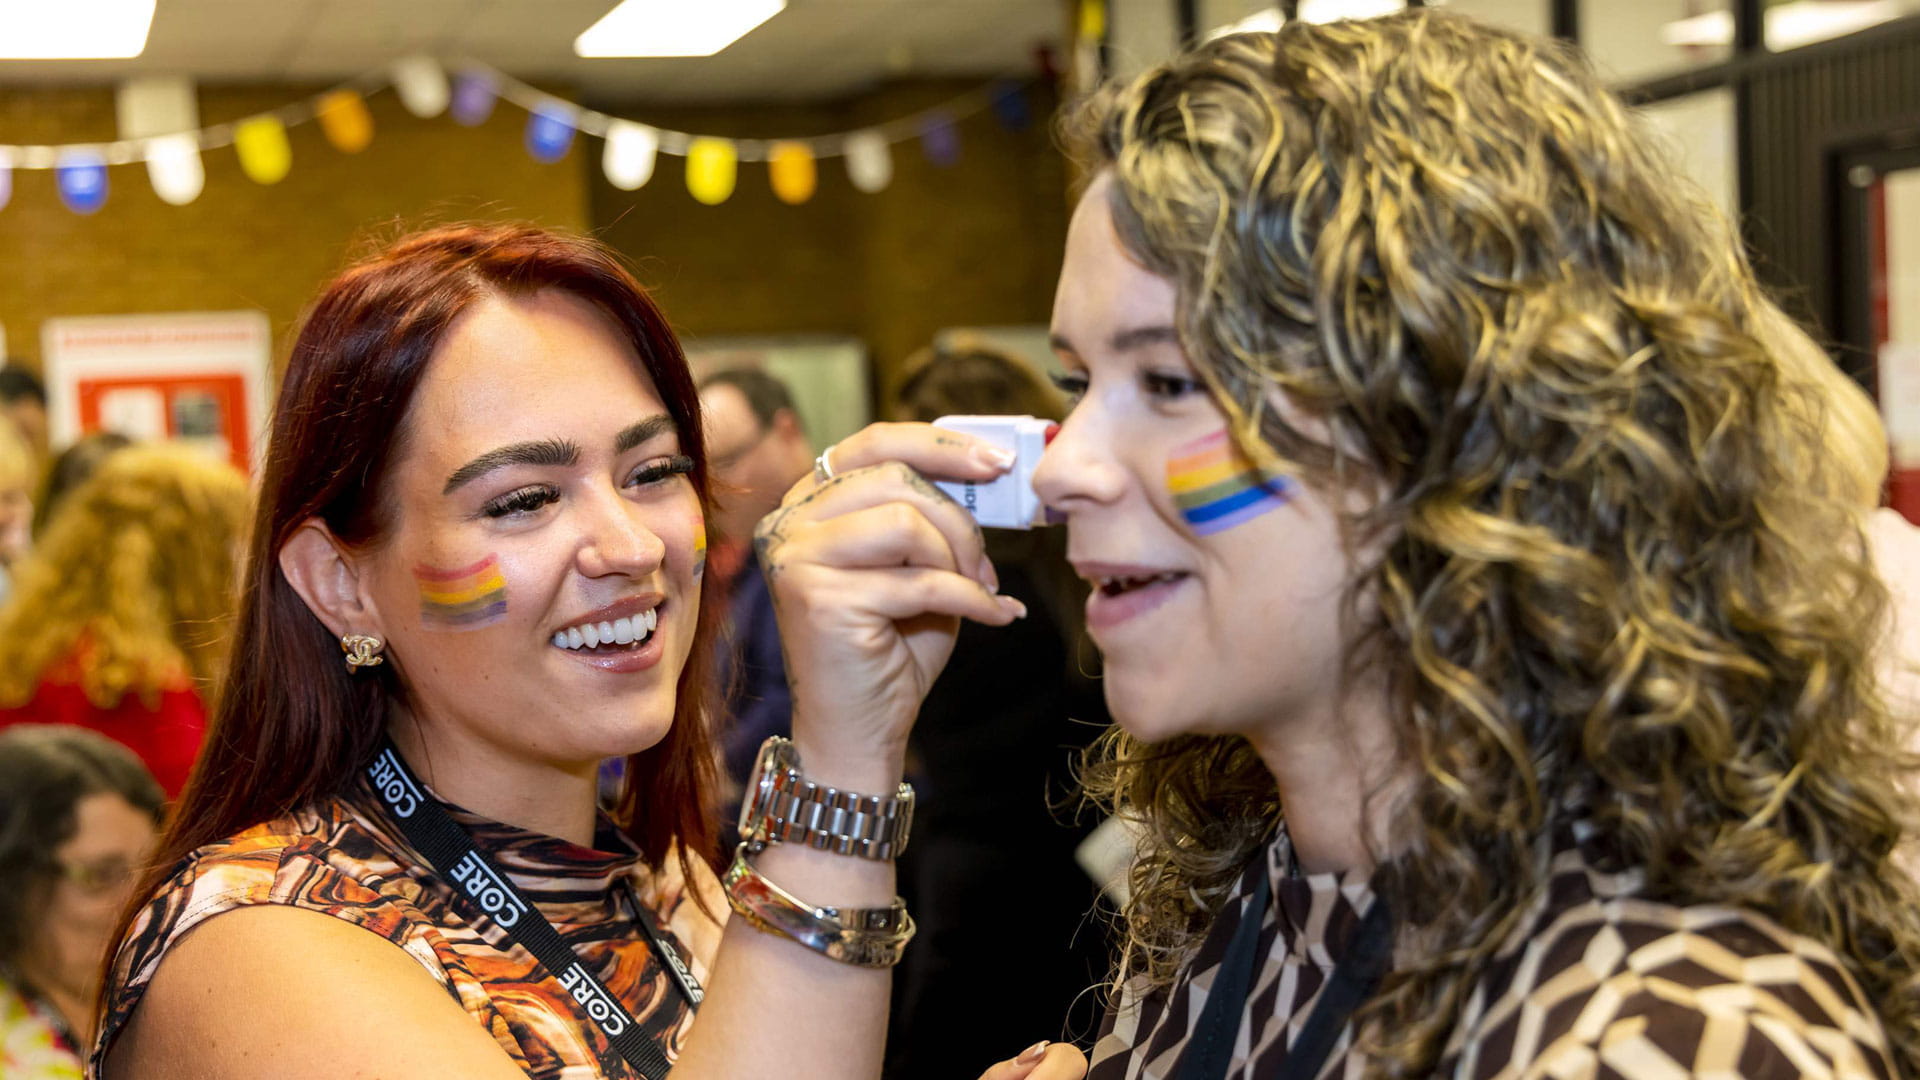 A woman applies Pride-themed face paint to another woman